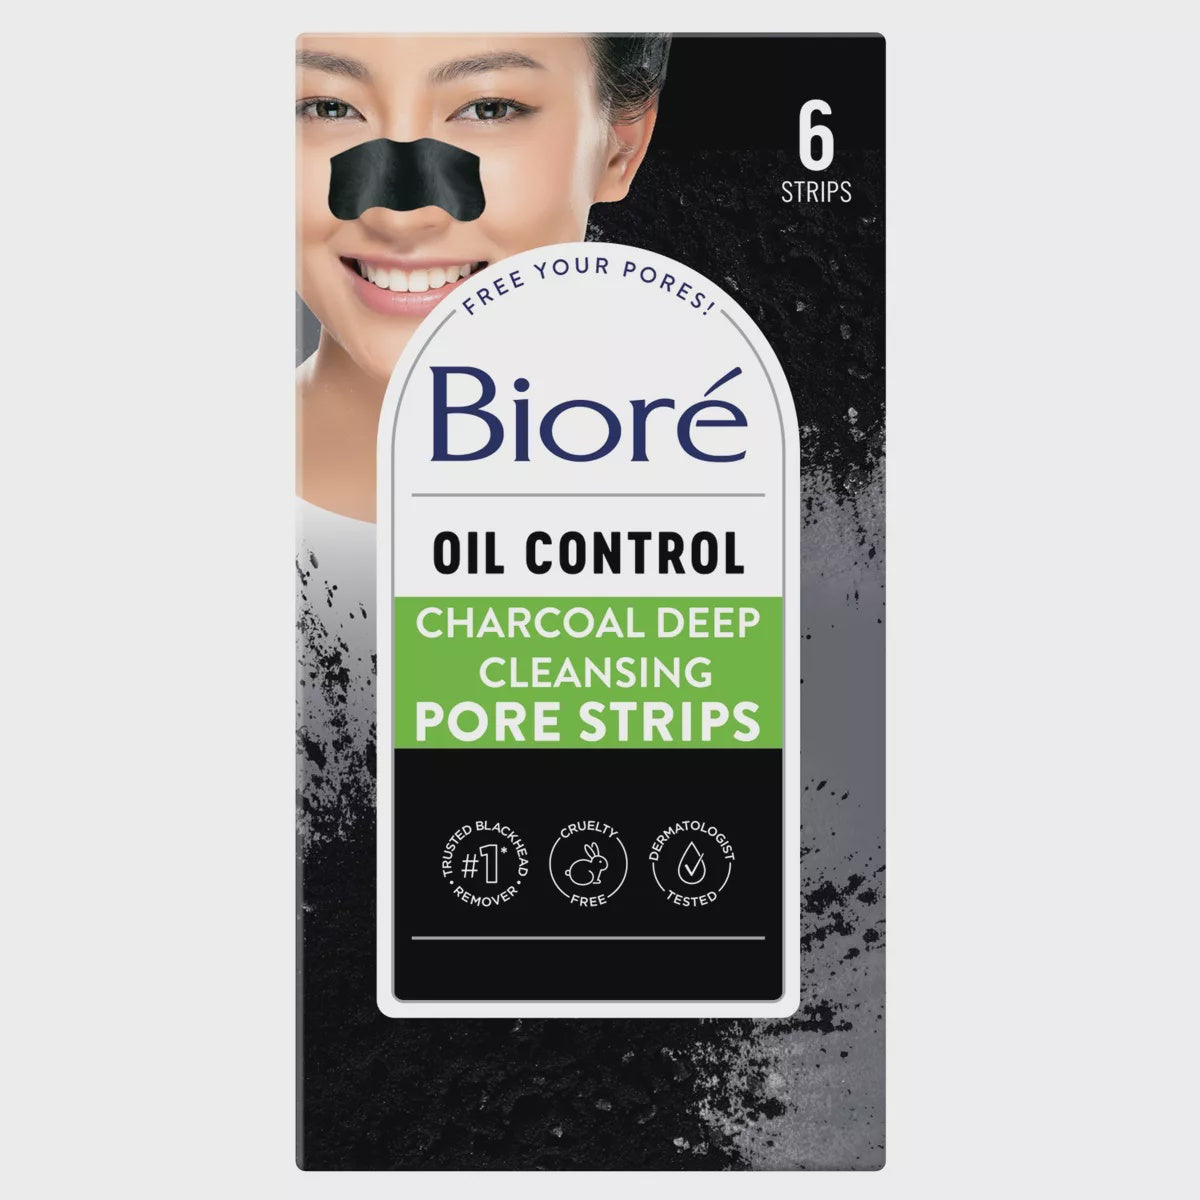 Biore Charcol Deep Cleansing Pore Strips 6ct